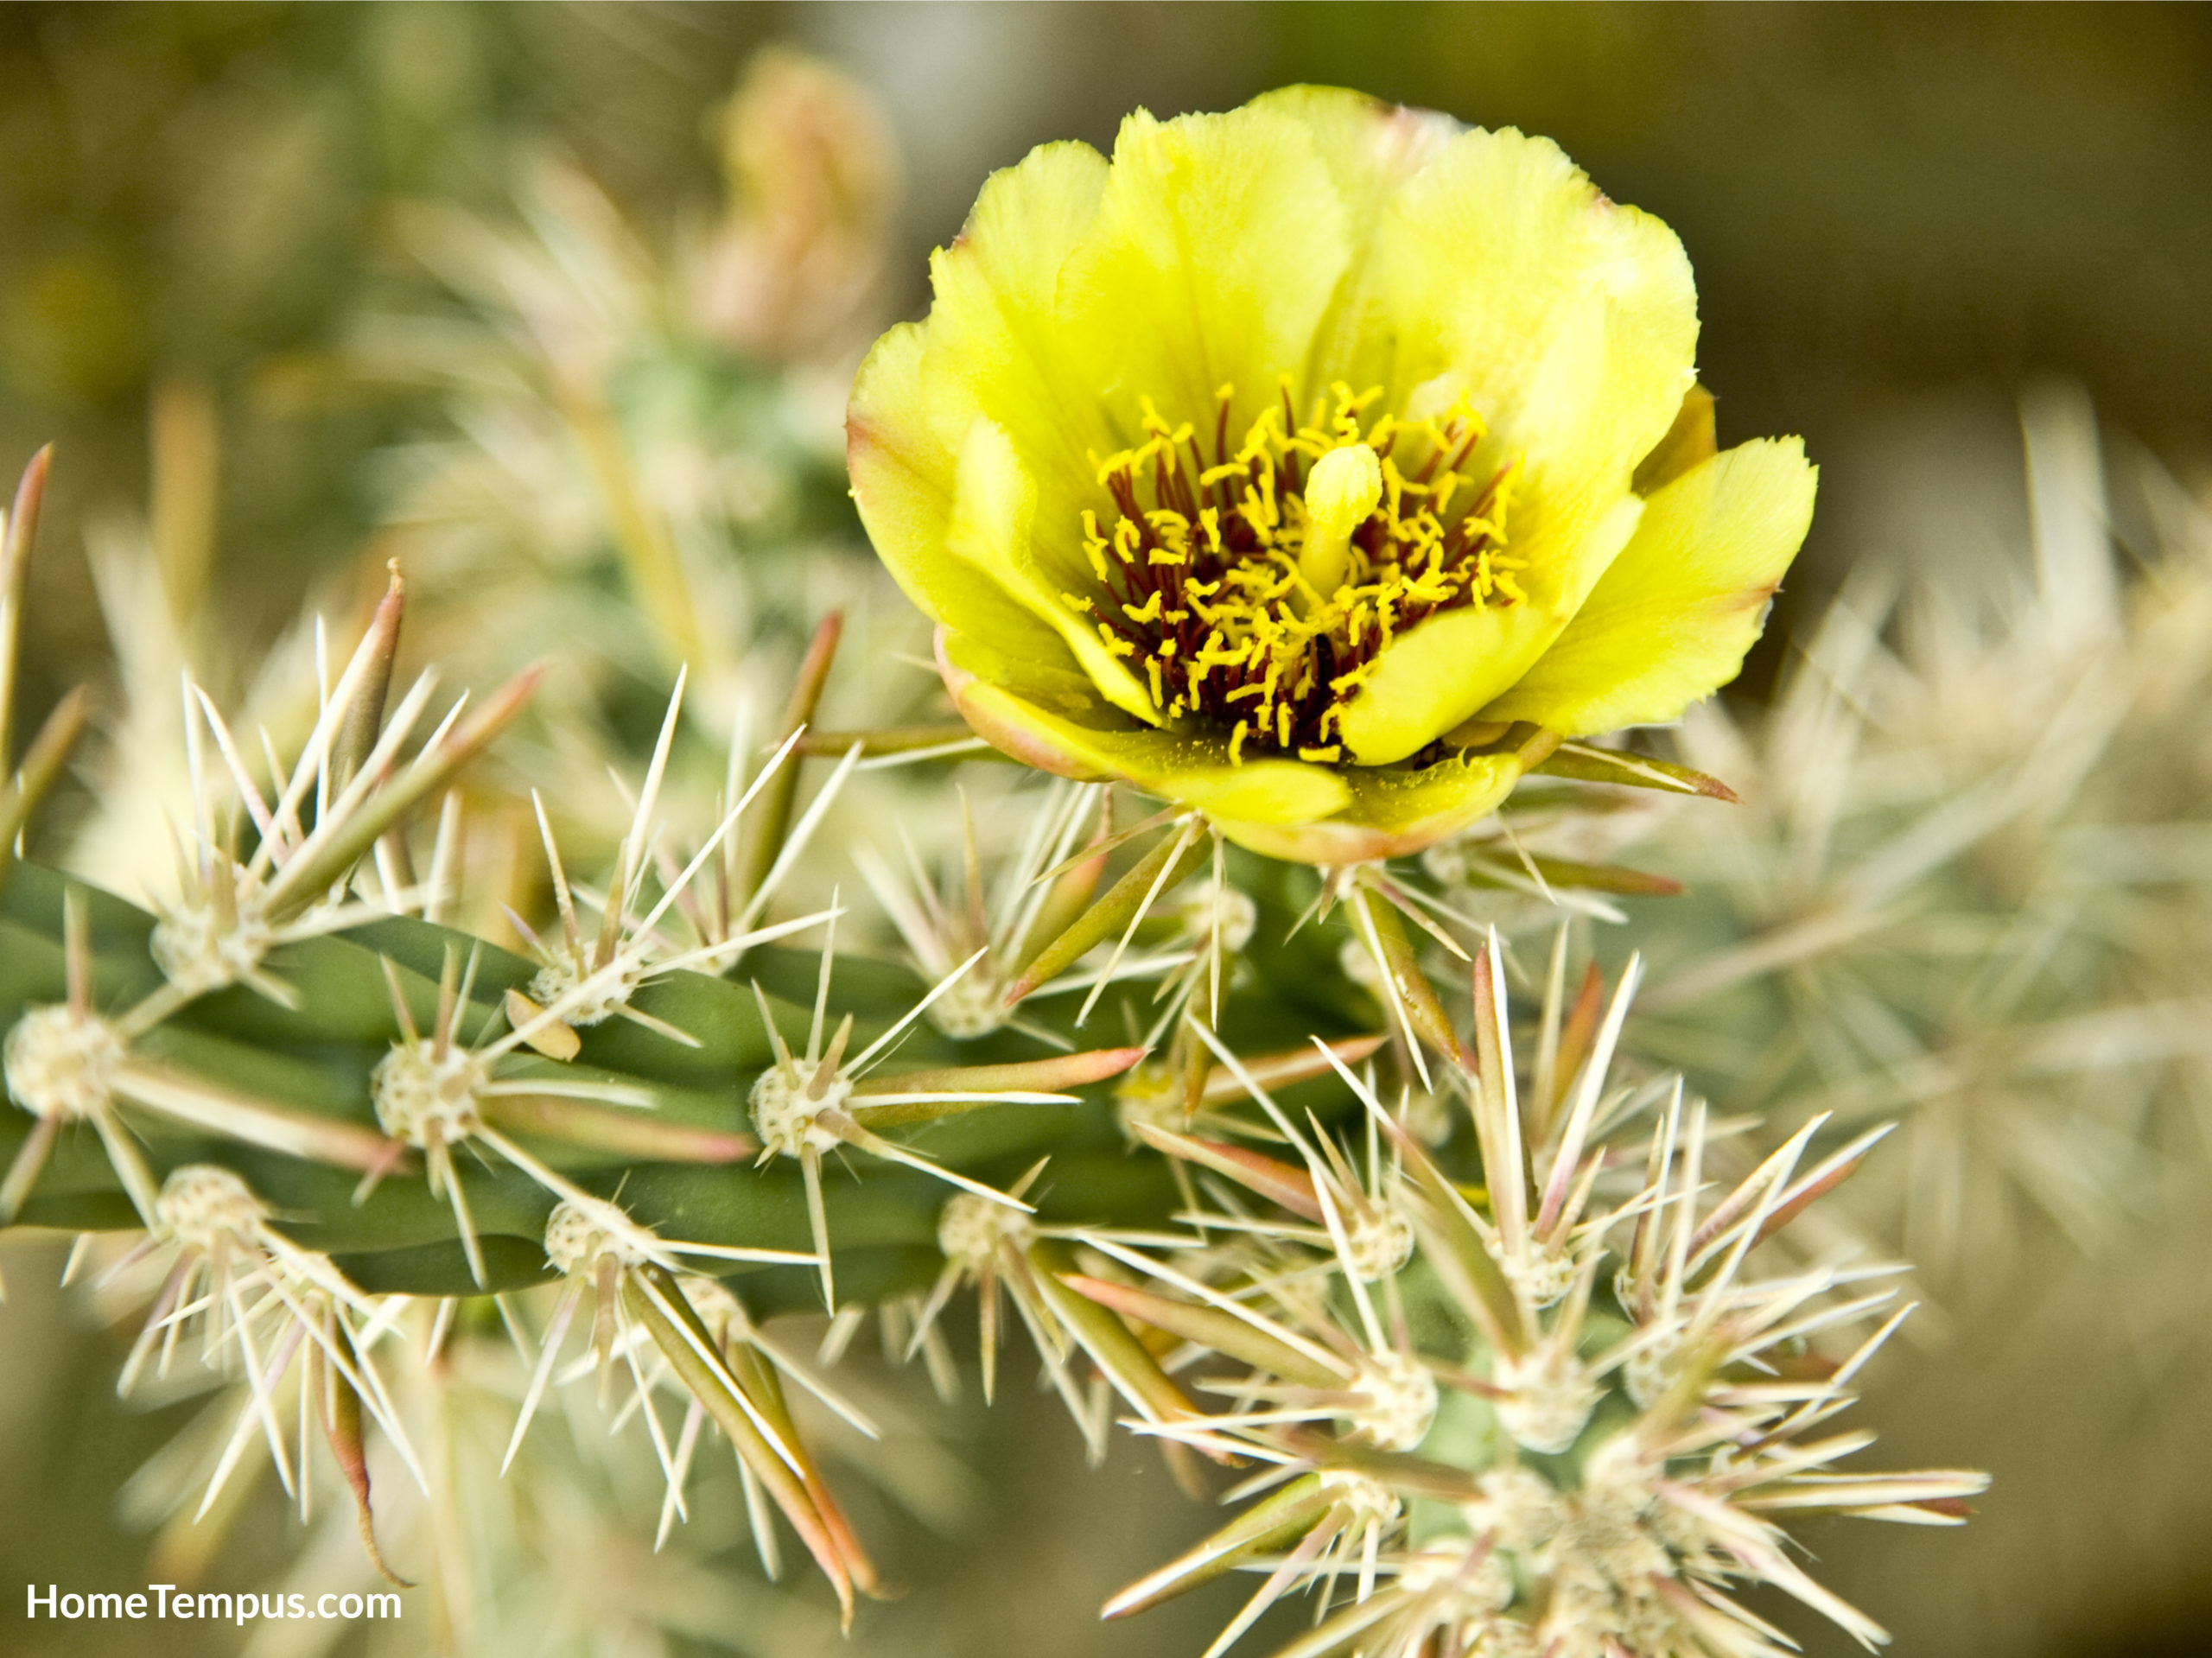 Pencil Cholla - Flowers that start with P